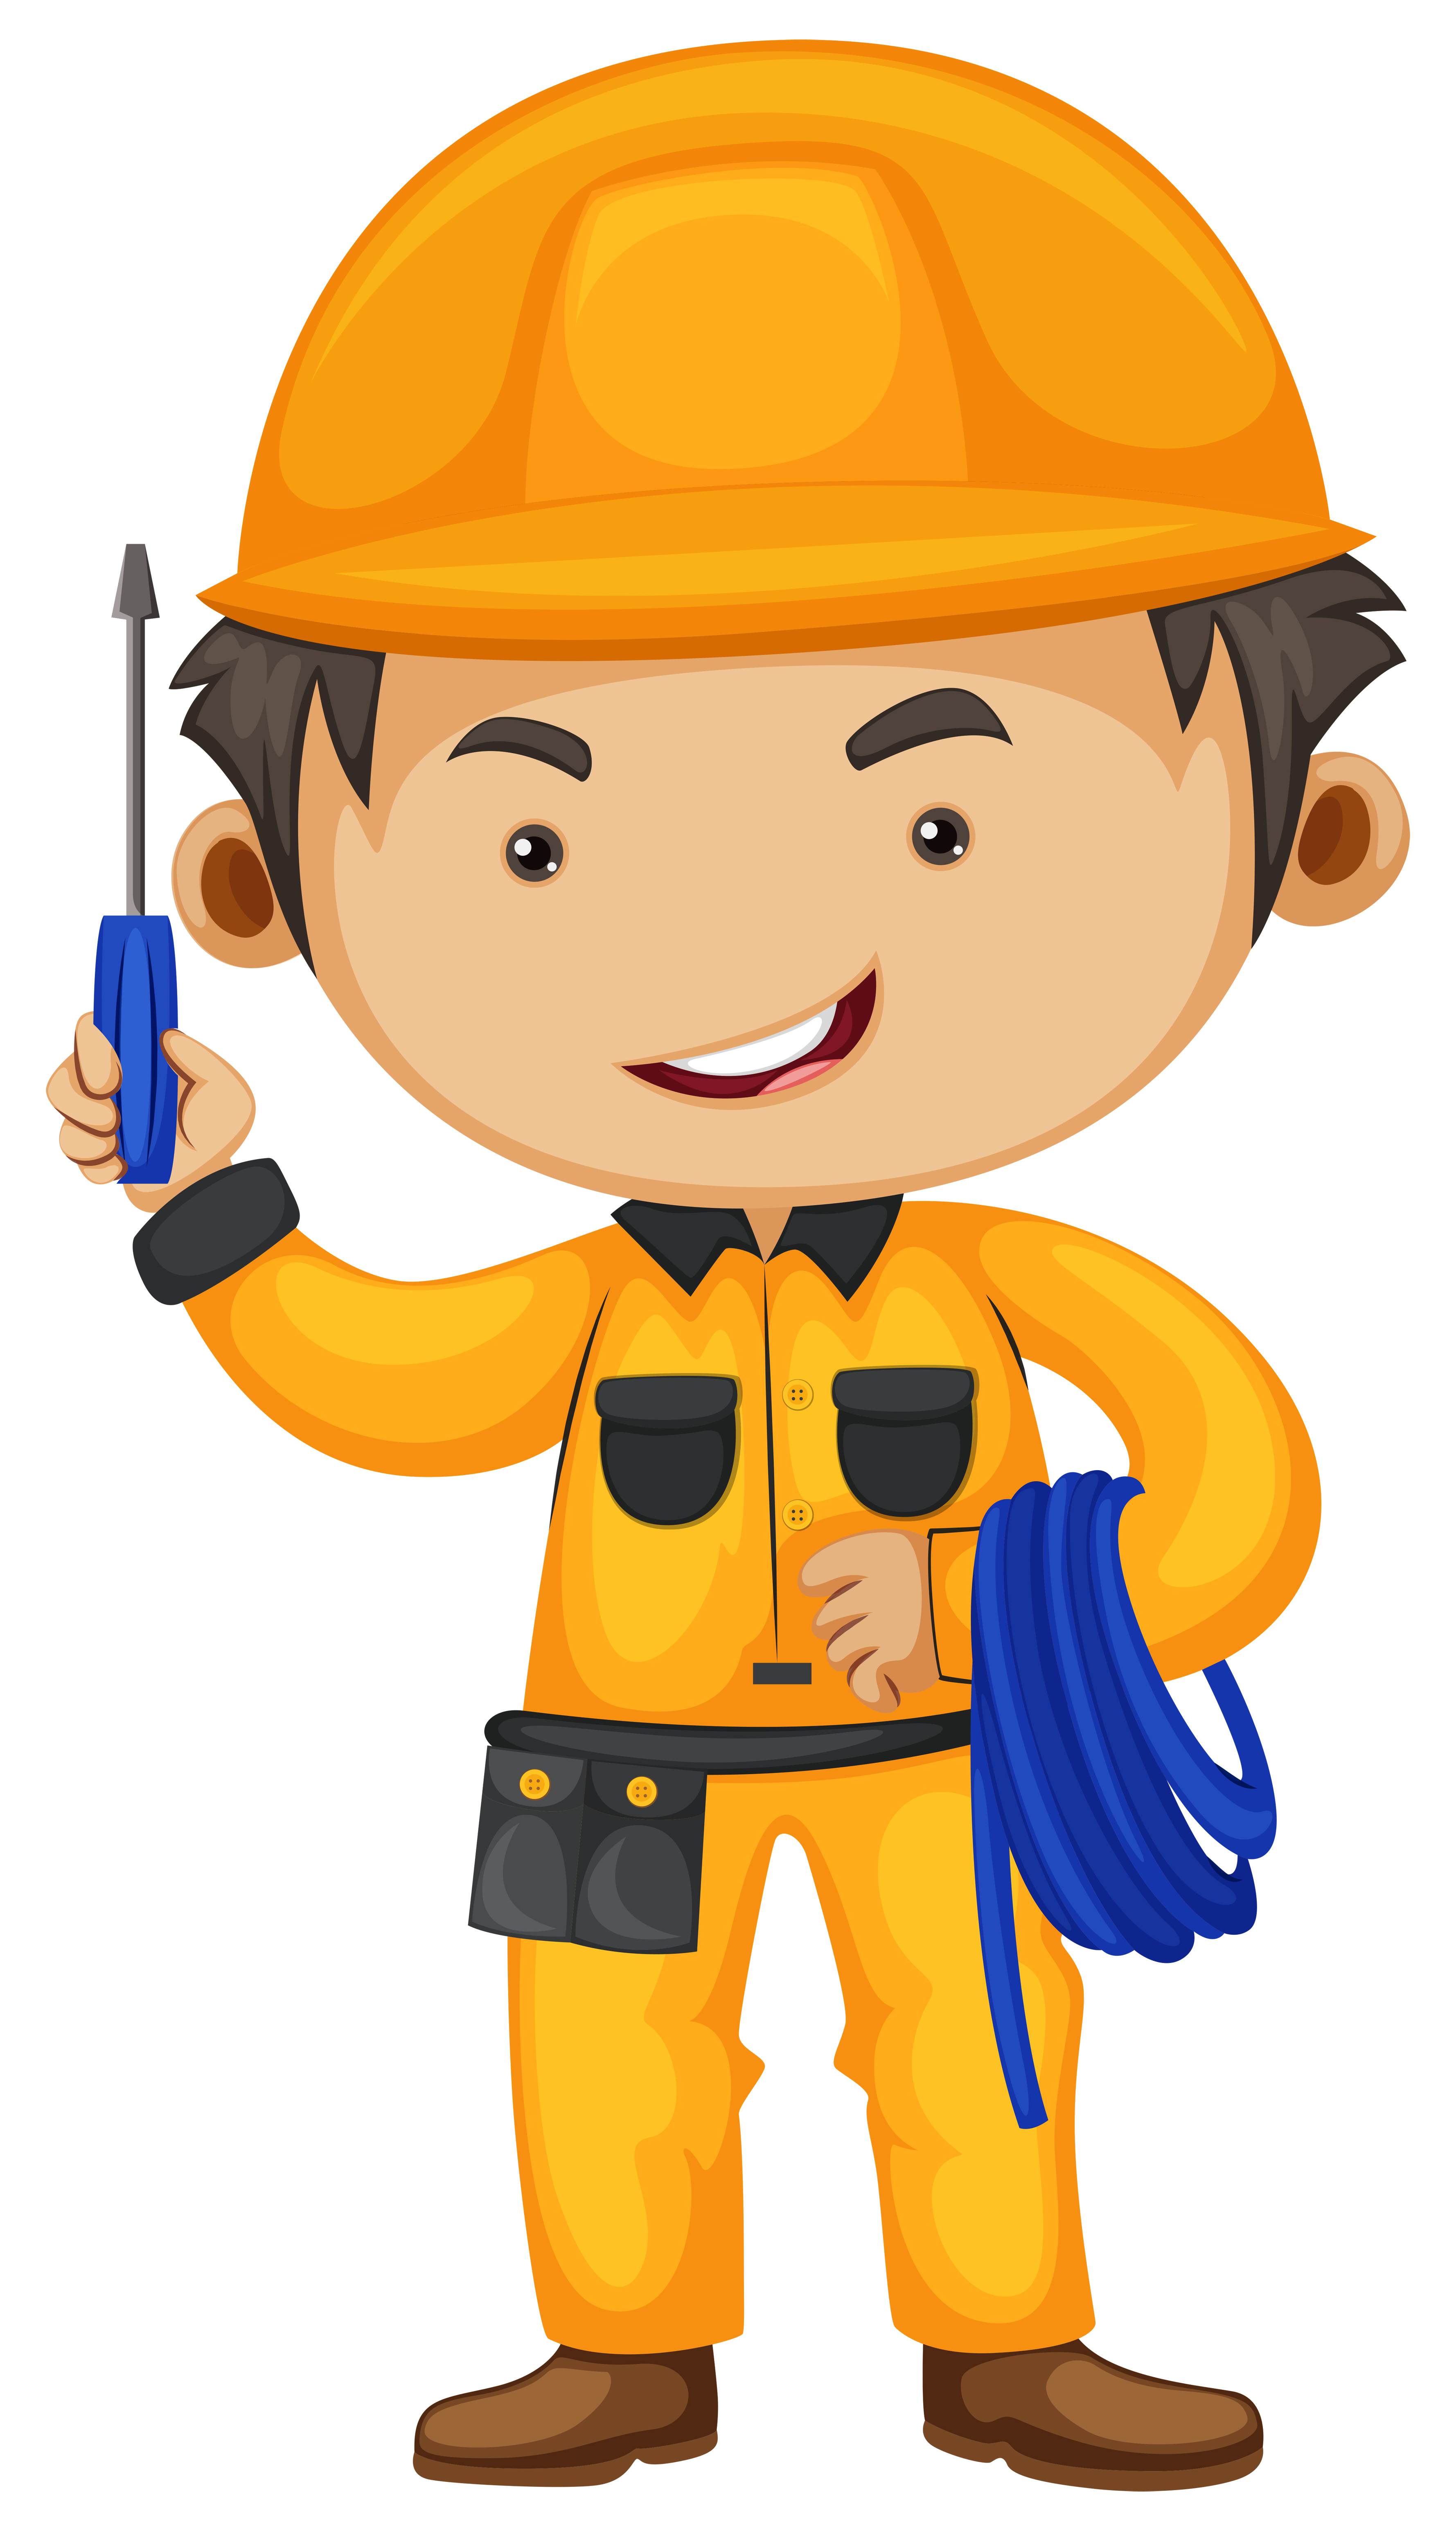 Electrician holding screwdriver and wire 559737 Vector Art